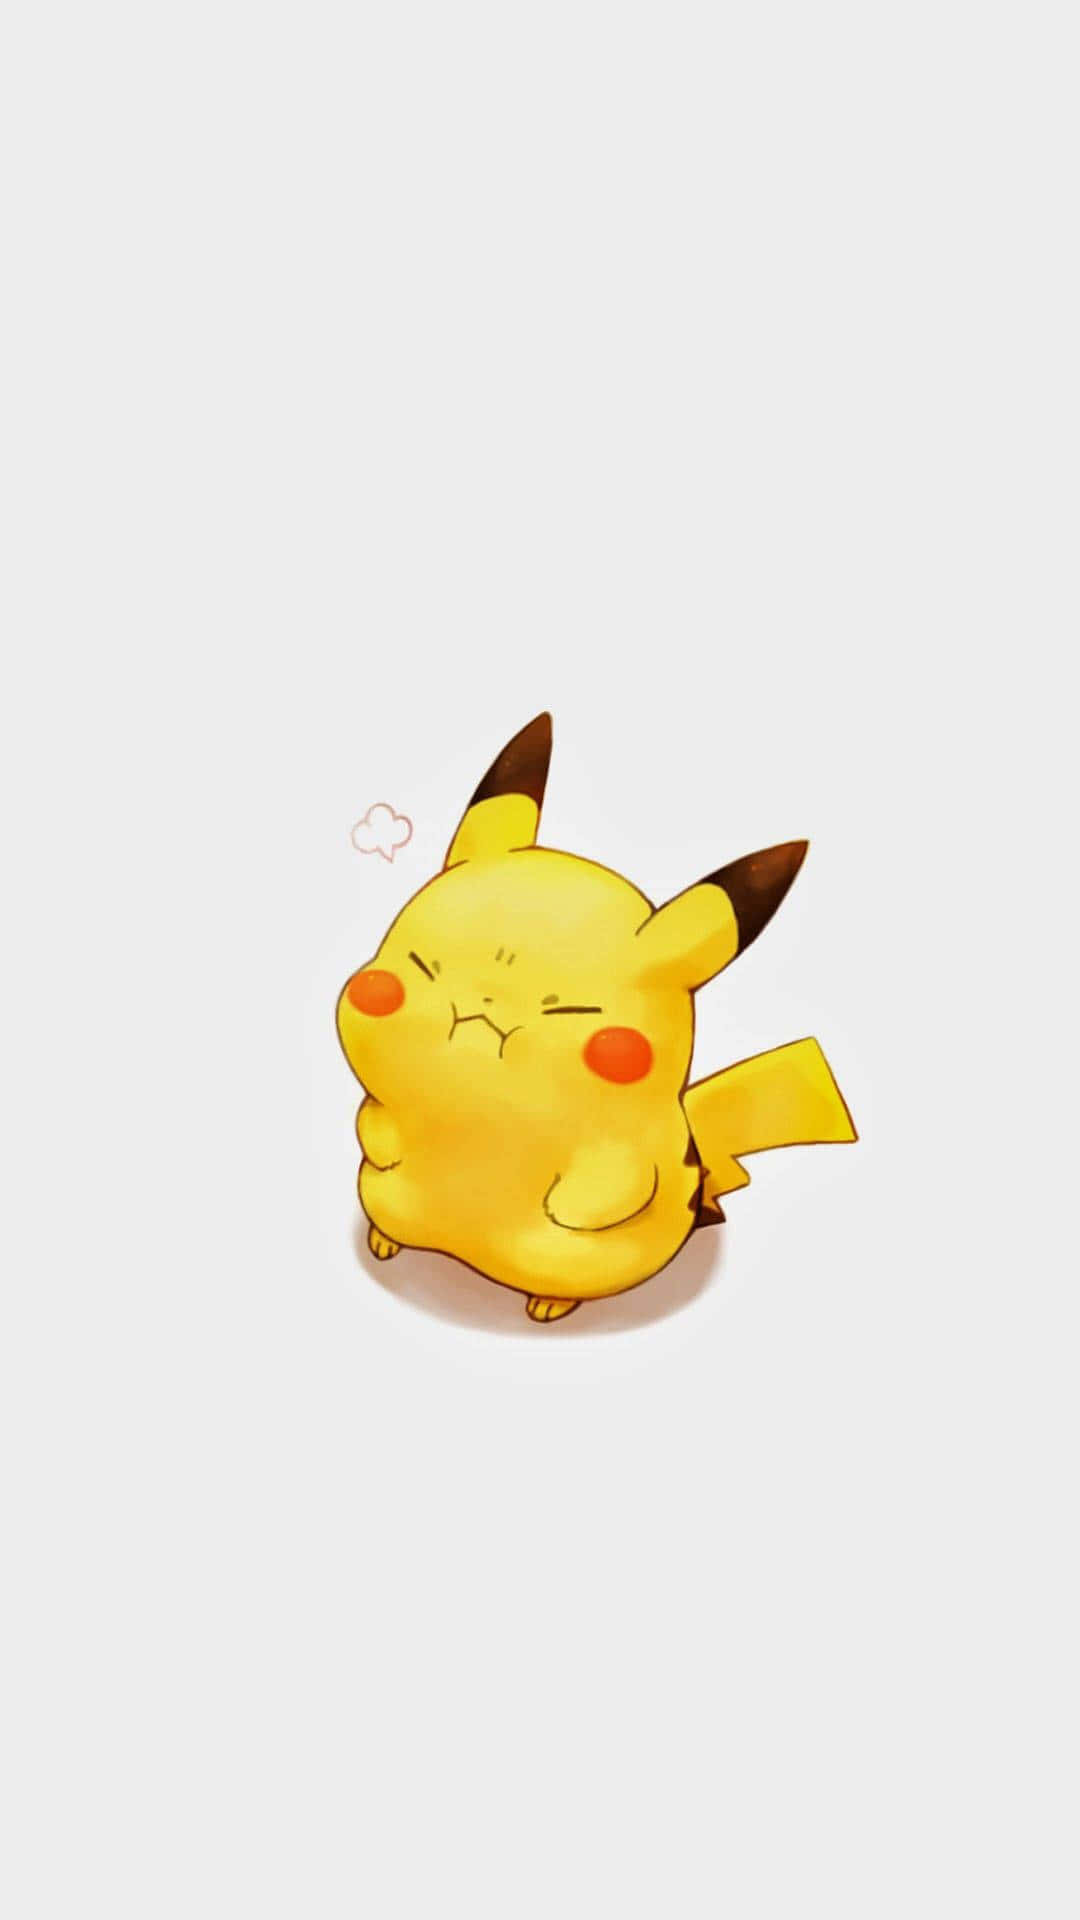 Sweet And Mischievous, This Adorable Baby Pikachu Is A Must Have! Wallpaper